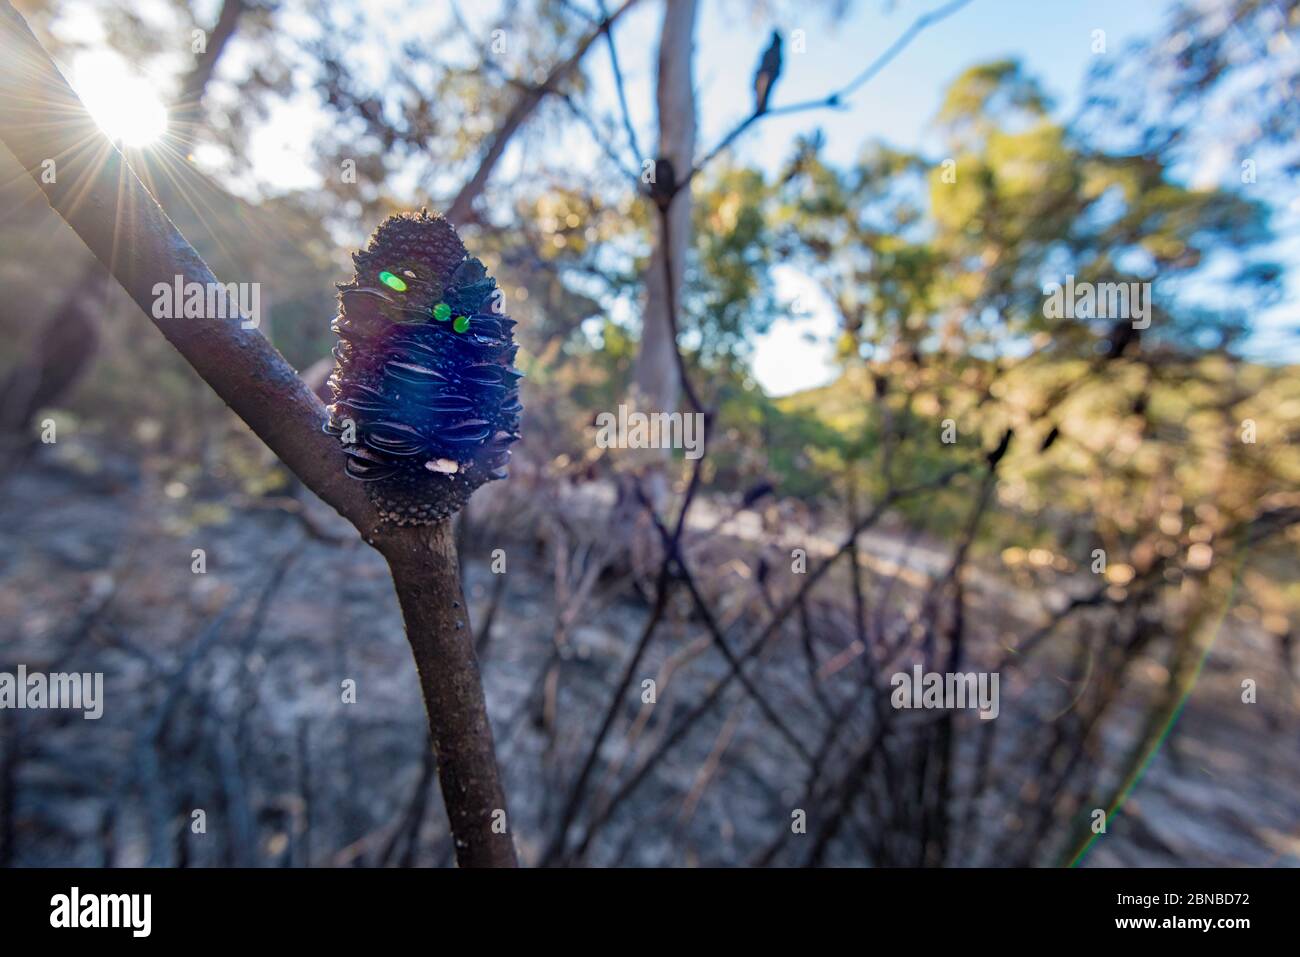 A native Australian Banksia Serrata seed cone opened by fire during a recent hazard reduction burn in Sydney, Australia Stock Photo